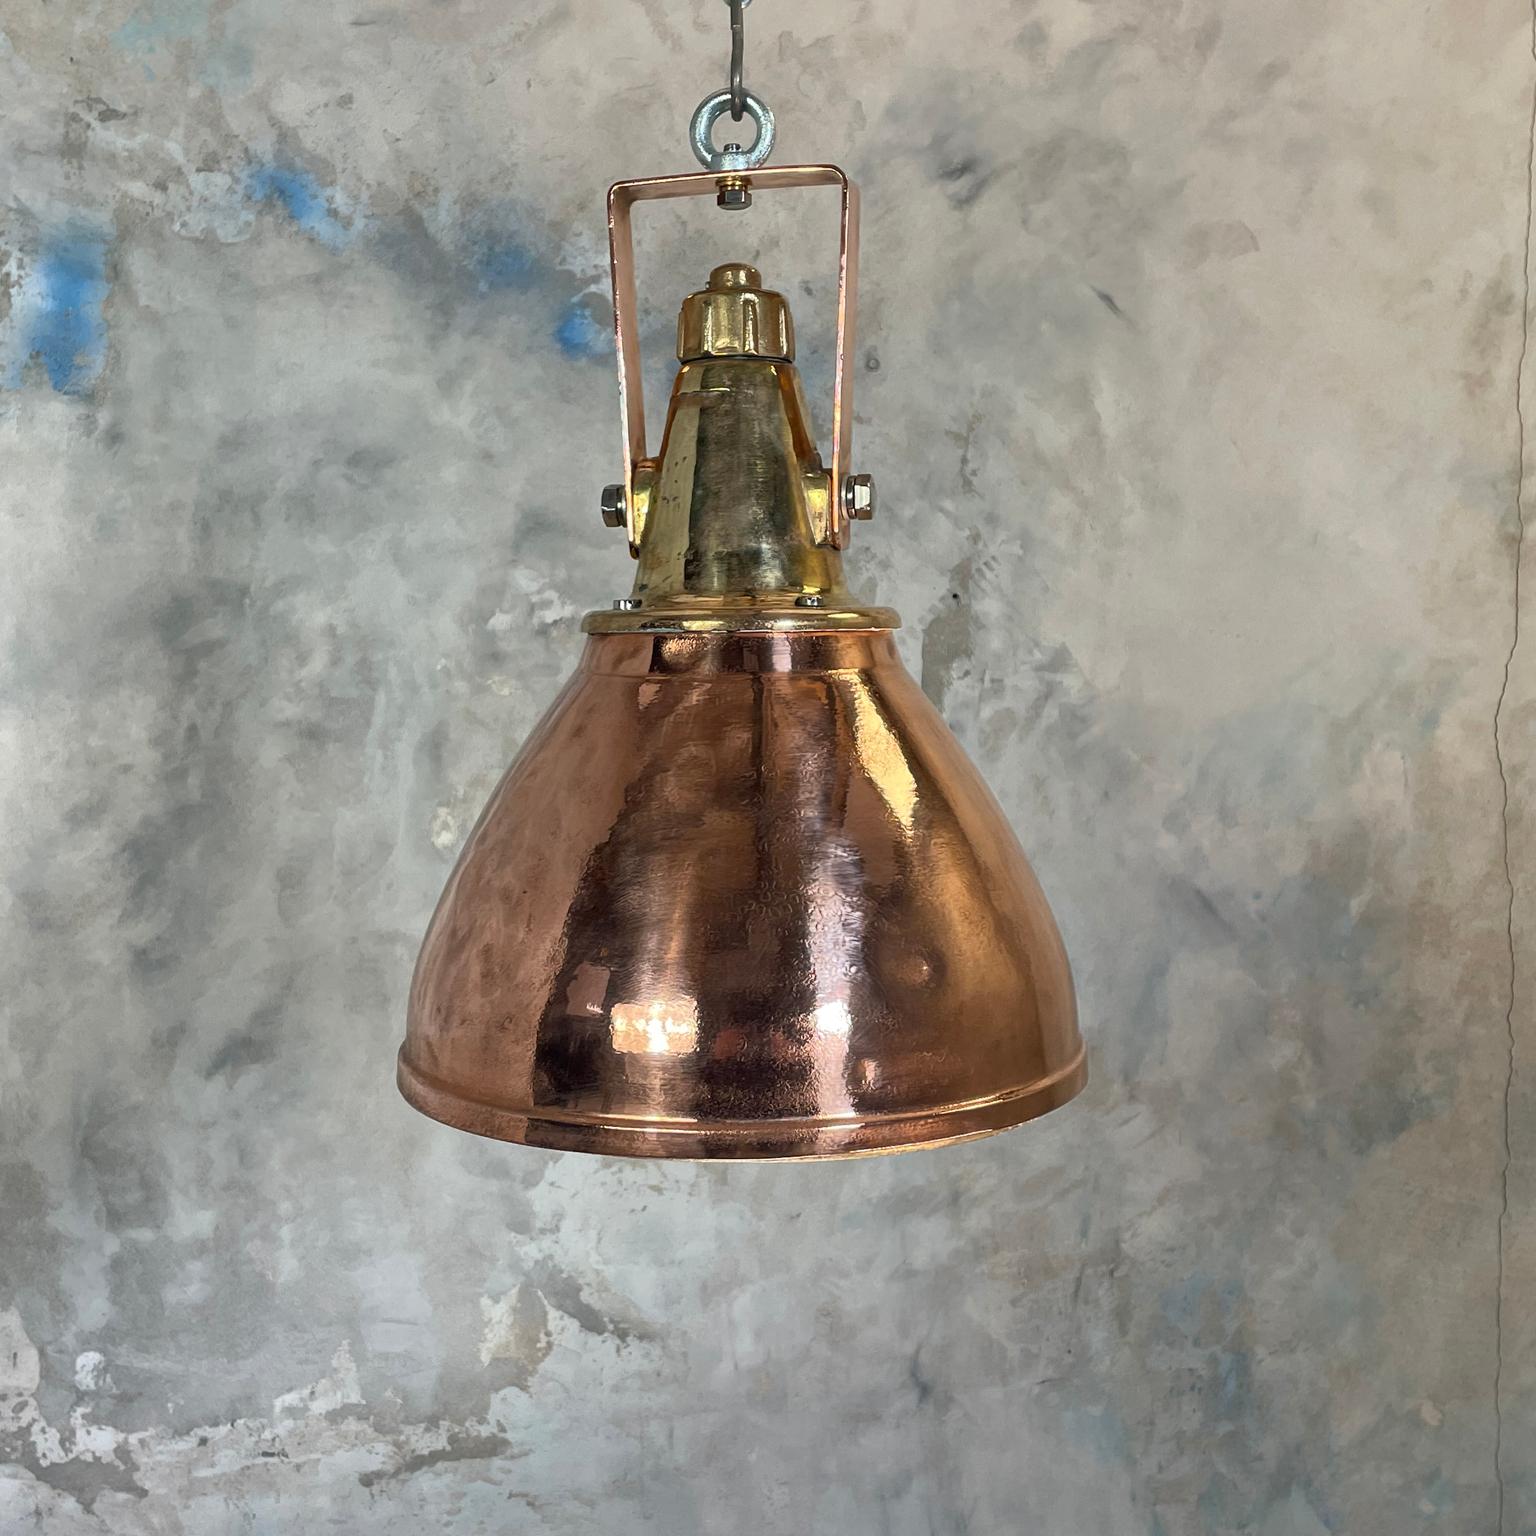 1970s German Copper & Brass Industrial Ceiling Pendant Light with Beam Focus 14